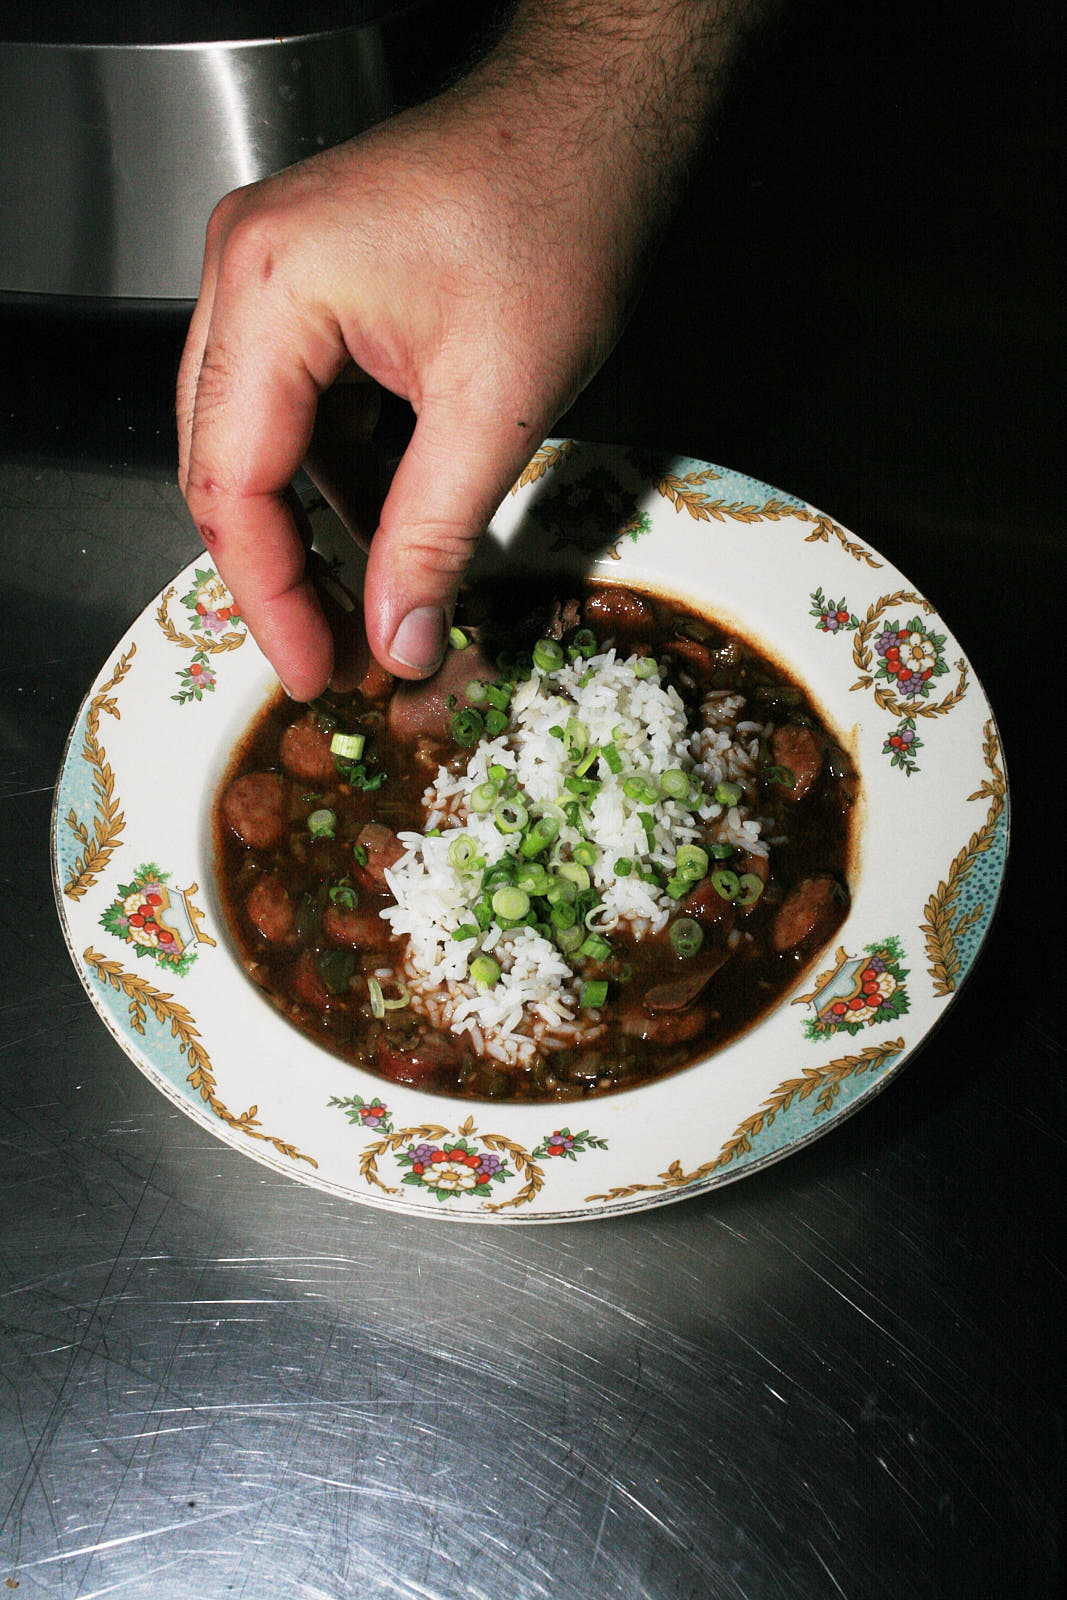 A shallow, floral-patterned china bowl of the gumbo, now with white rice and spring onions added.